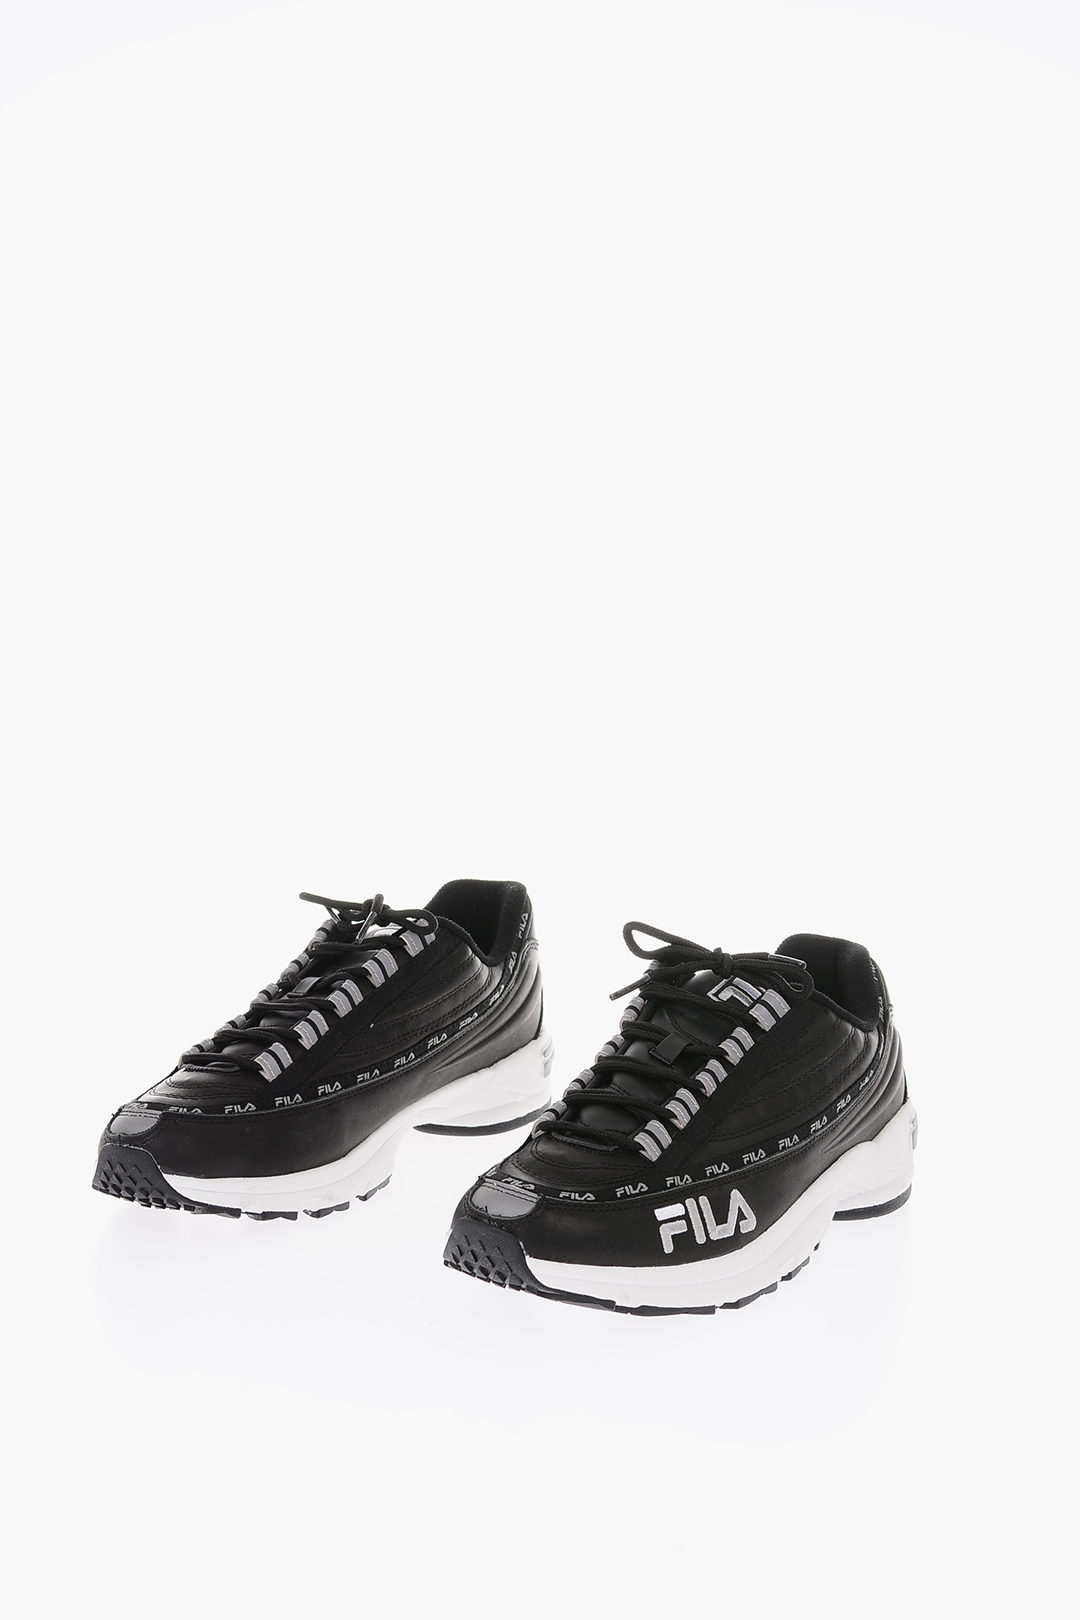 FILA logoed band leather DSTR97 low-top sneakers men - Glamood Outlet